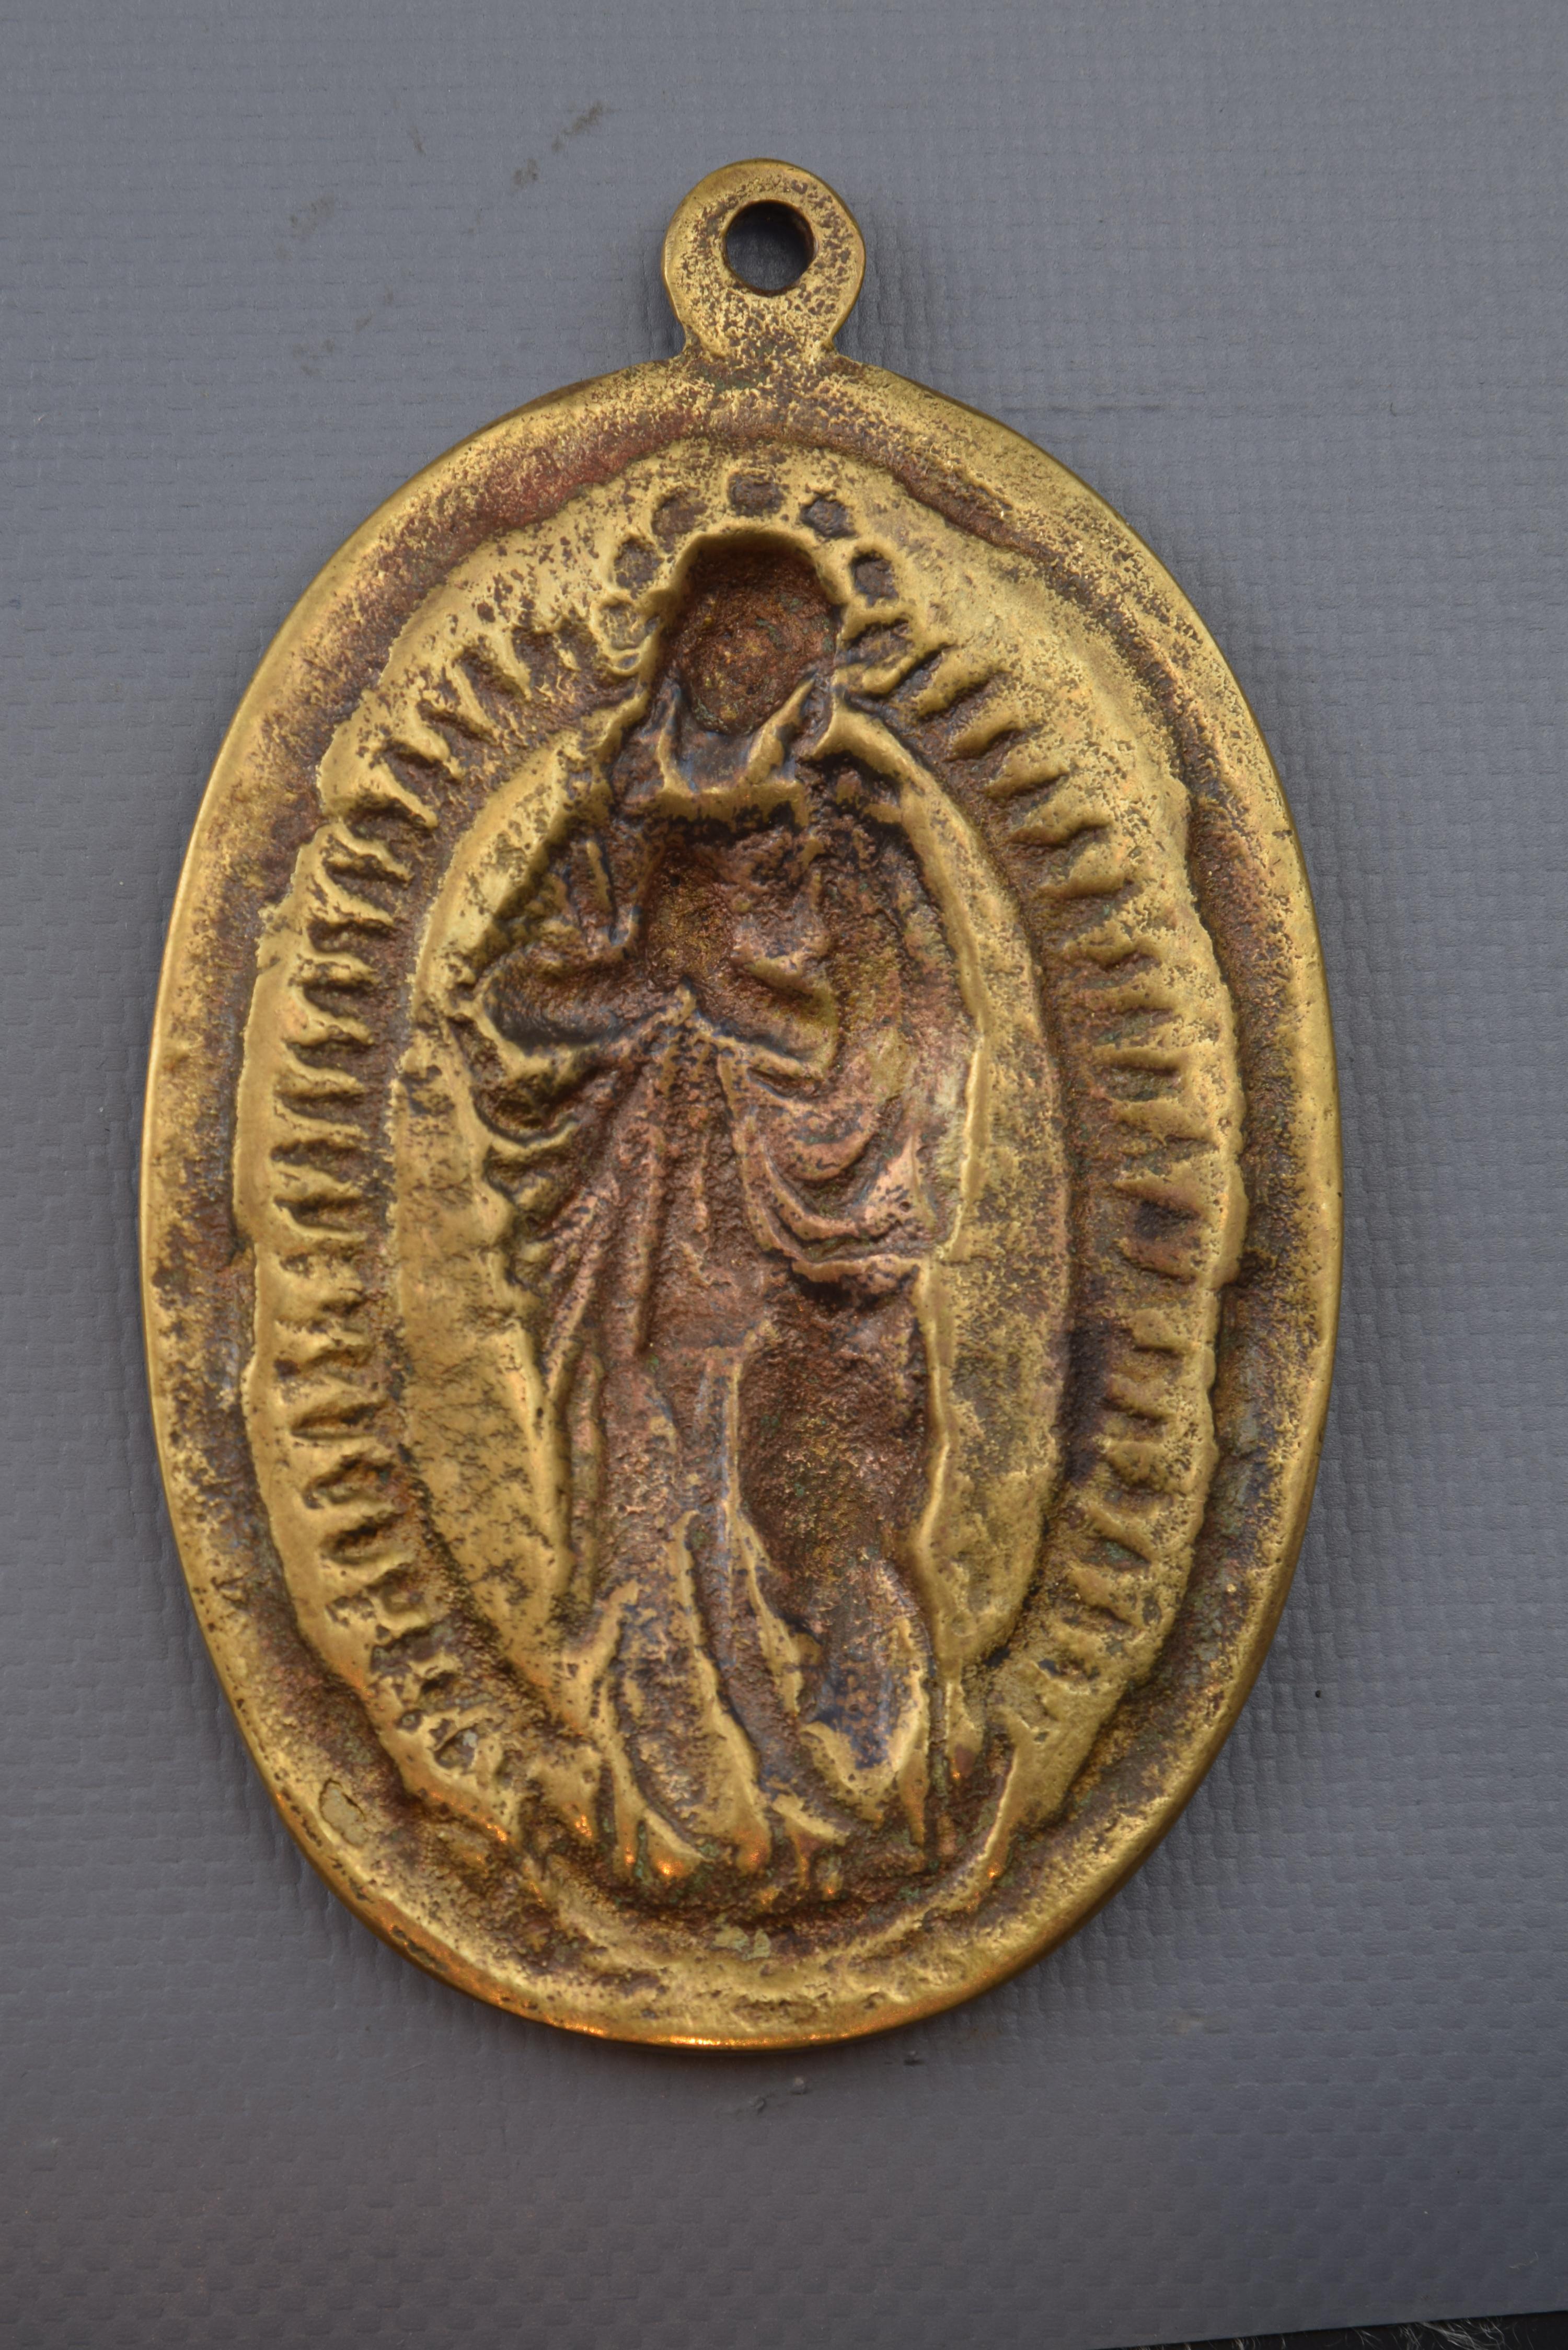 Devotional plaque, immaculate bronze, 19th century.
Devotional plate made of oval-shaped bronze, which has a ring on the top and a simple frame enhancing the relief of its forehead. With the Franciscan cord around it, the immaculate figure is